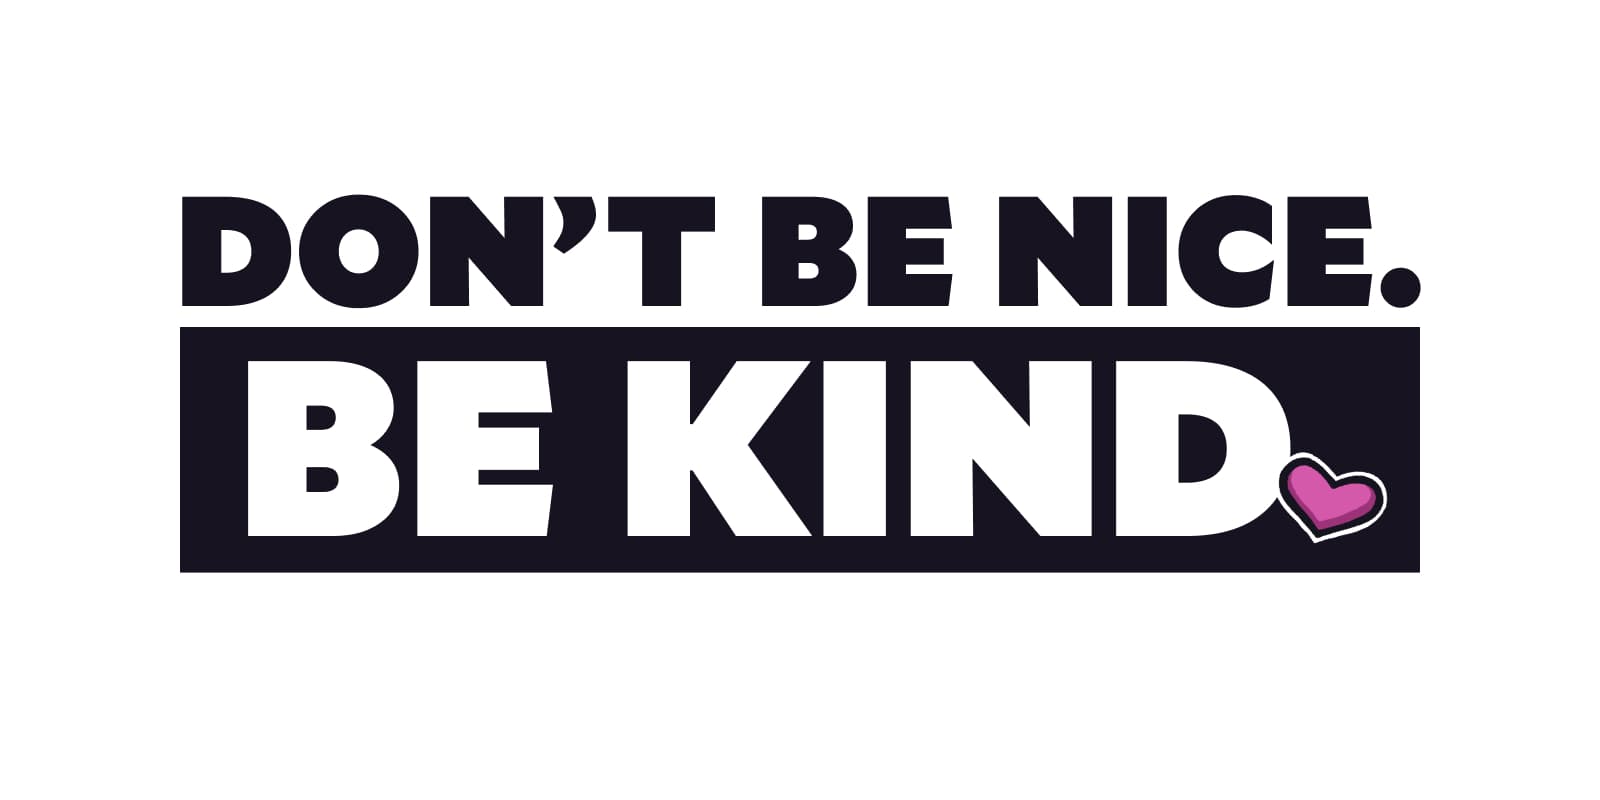 Don't be nice. Be kind.